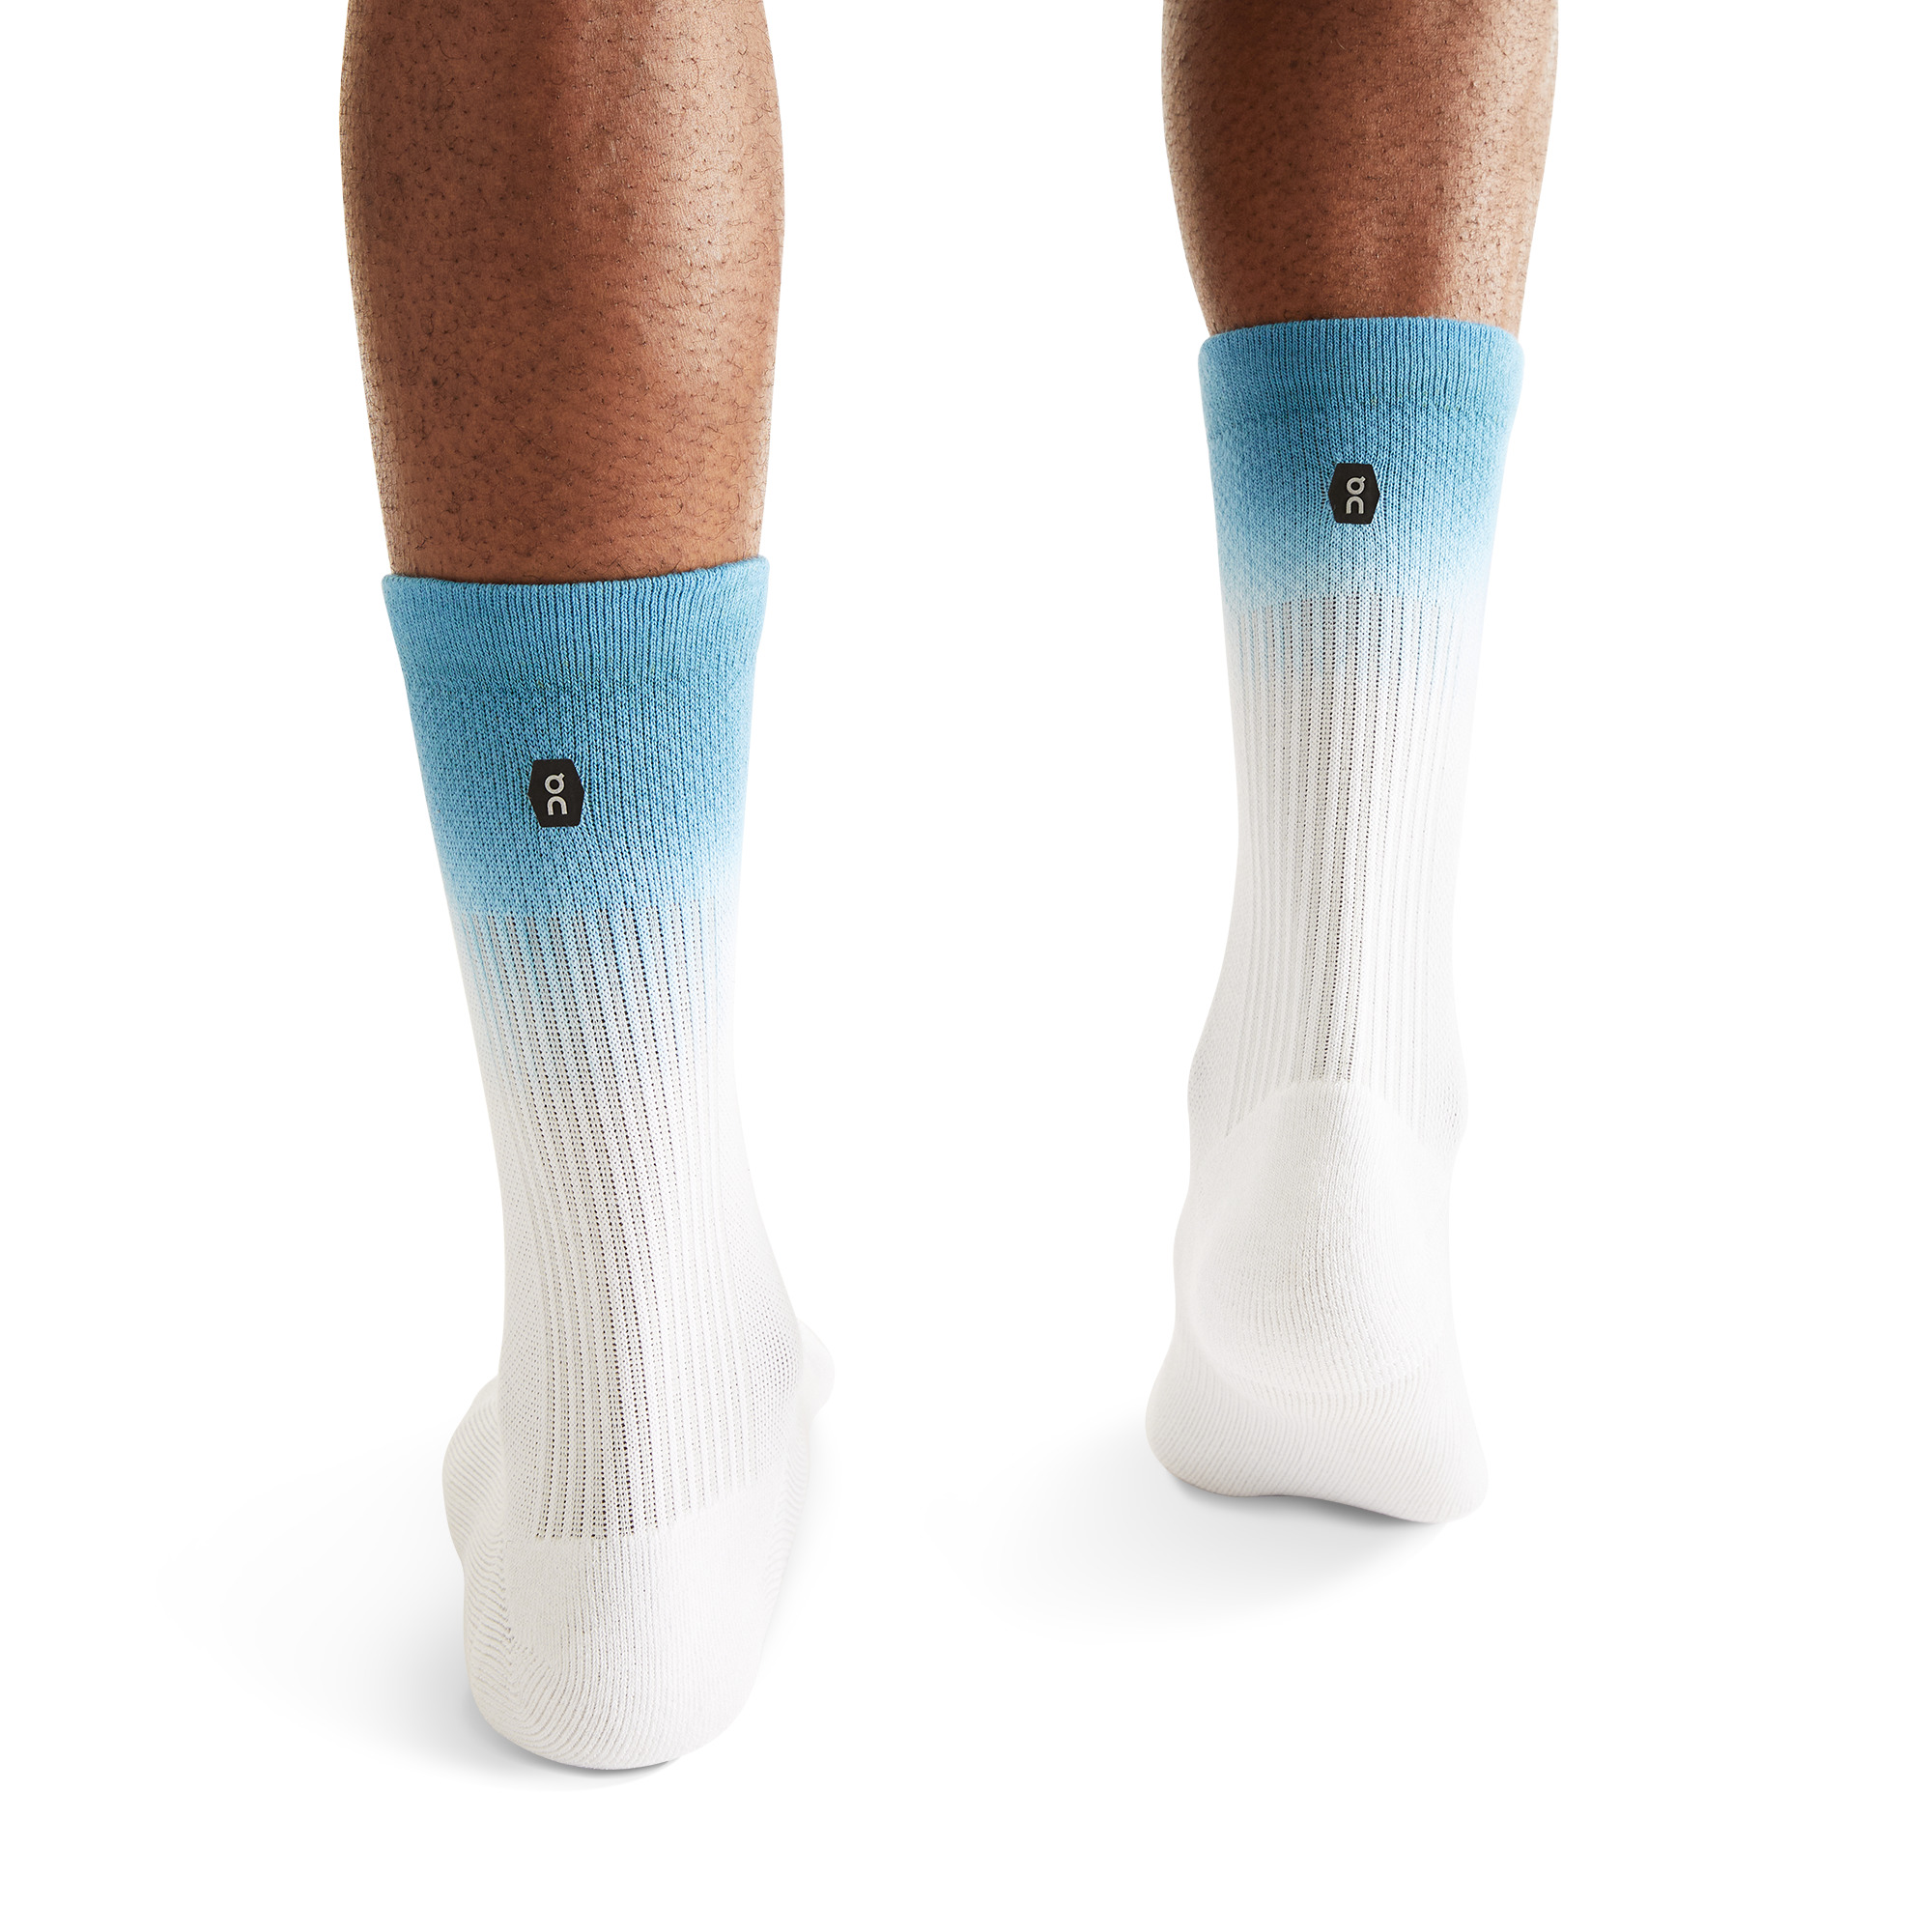 All-Day Sock - 3